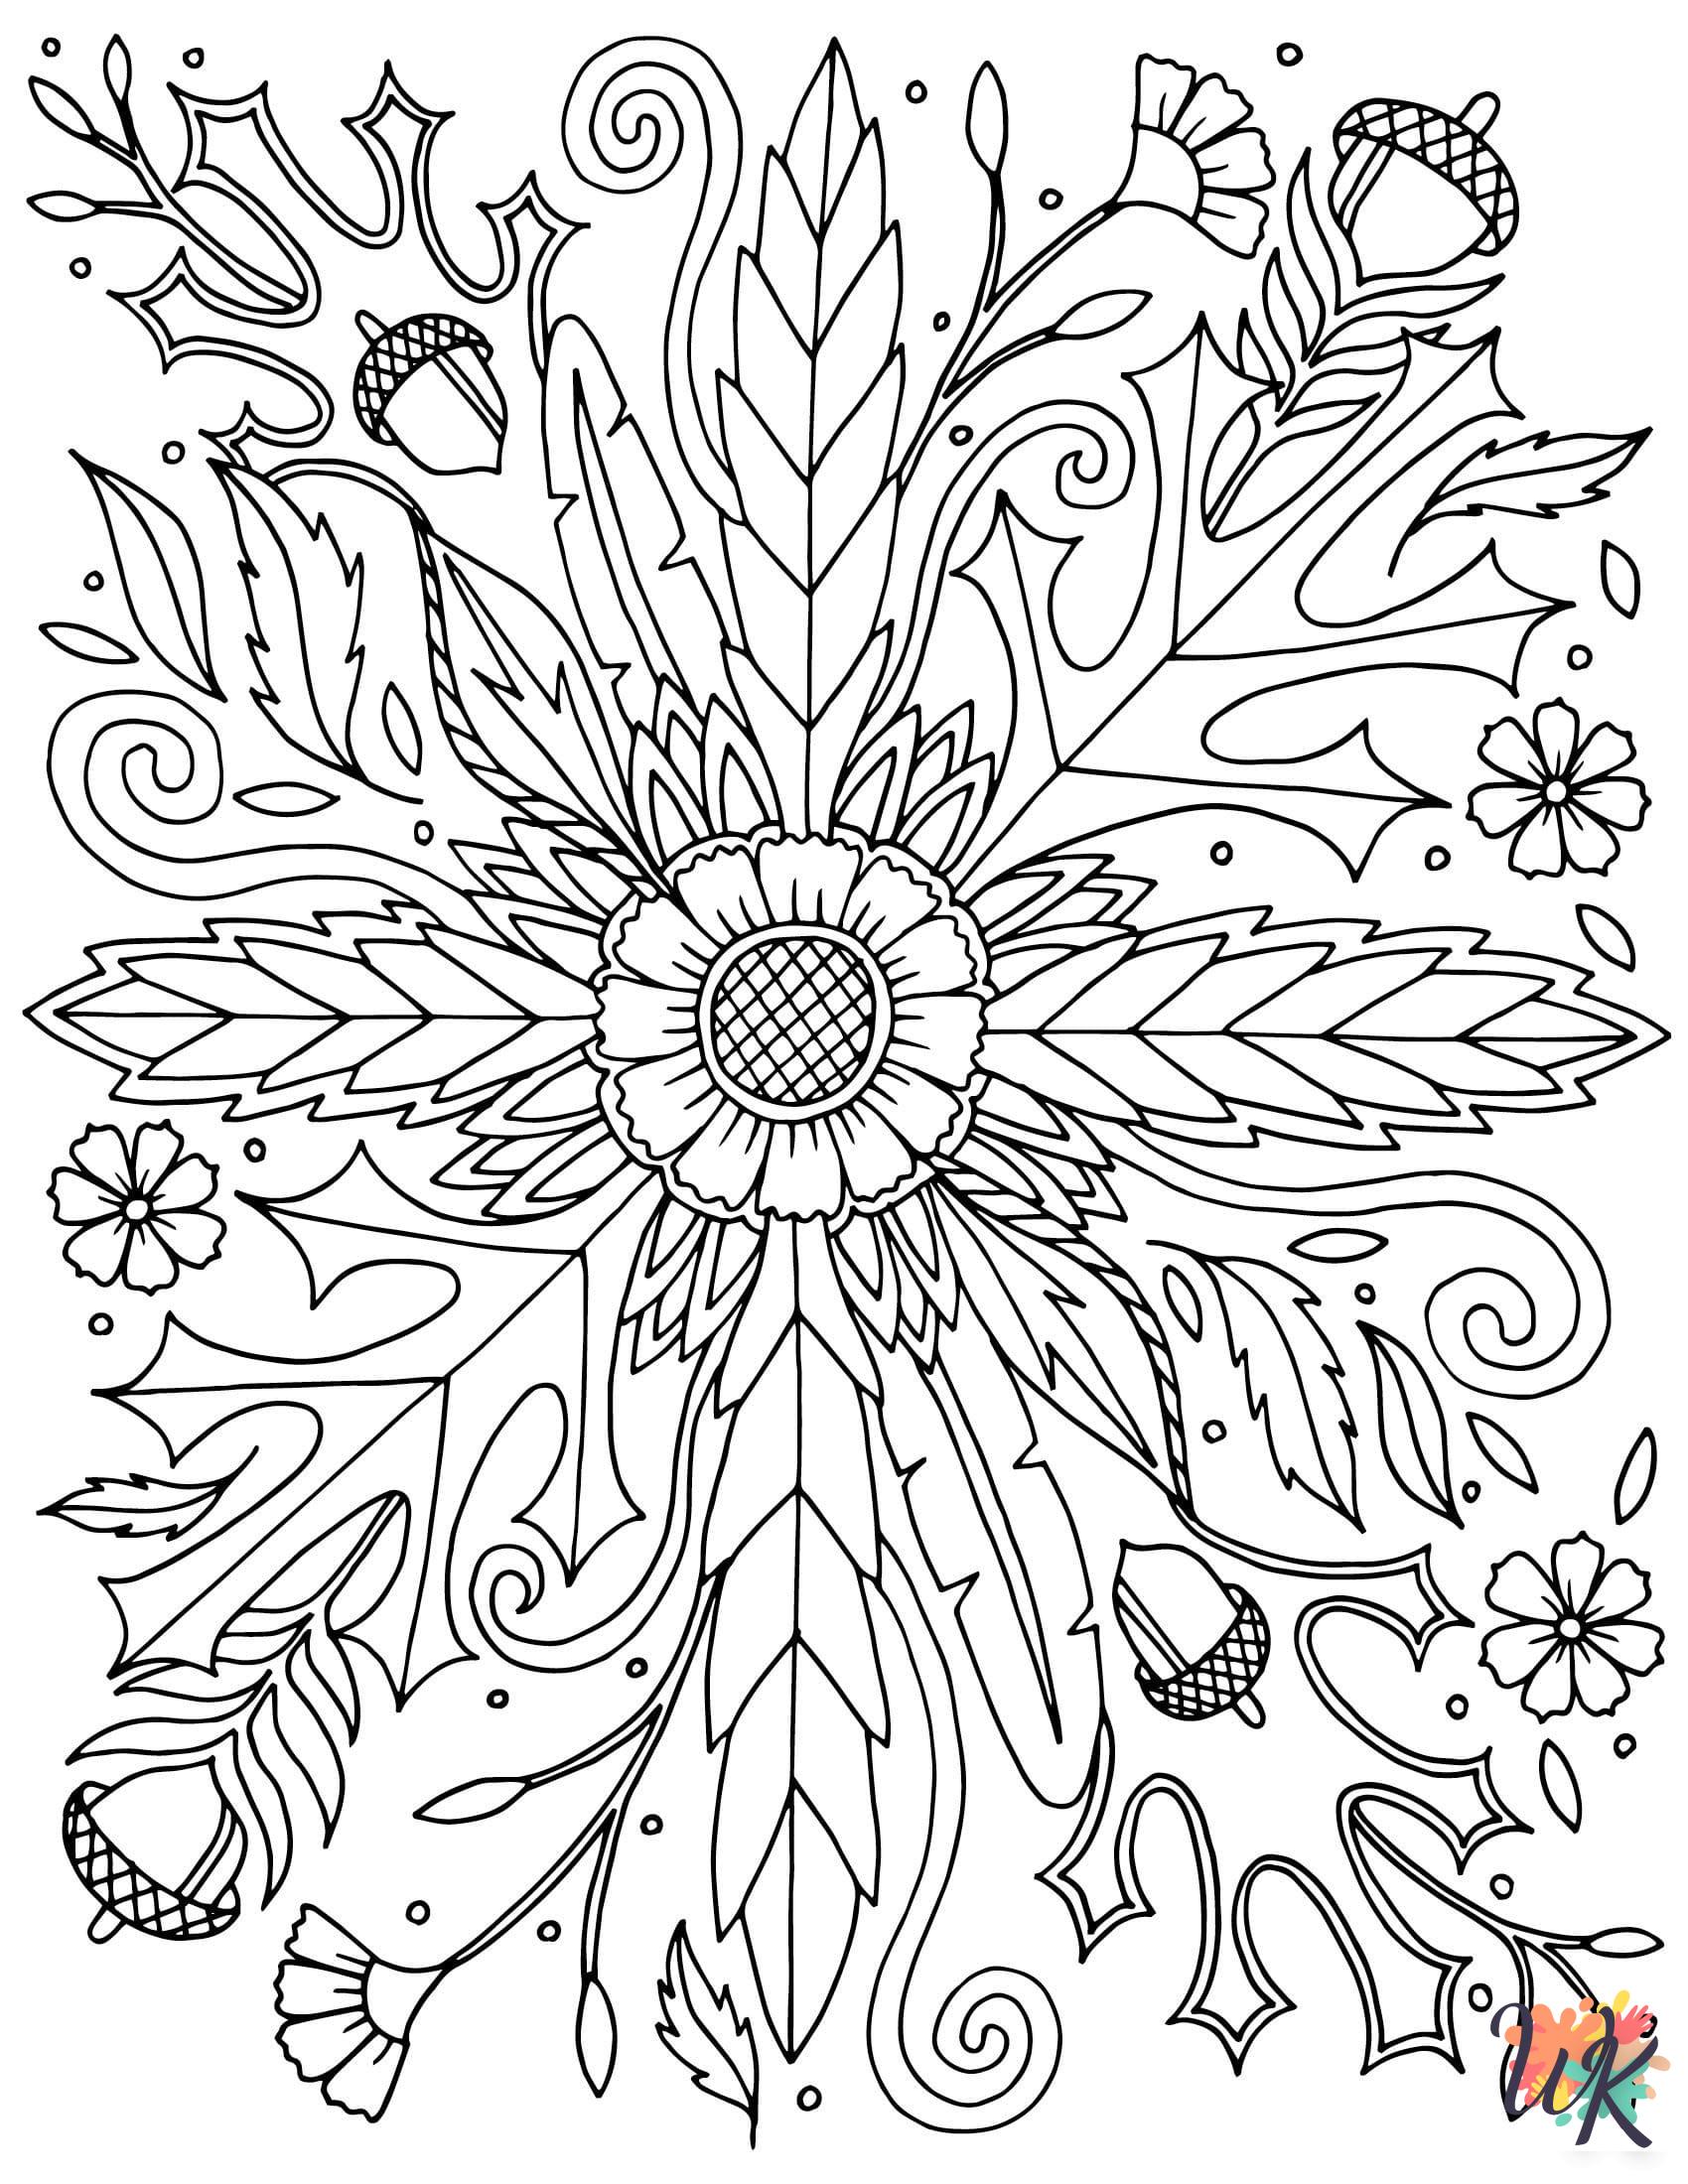 Autumm coloring pages